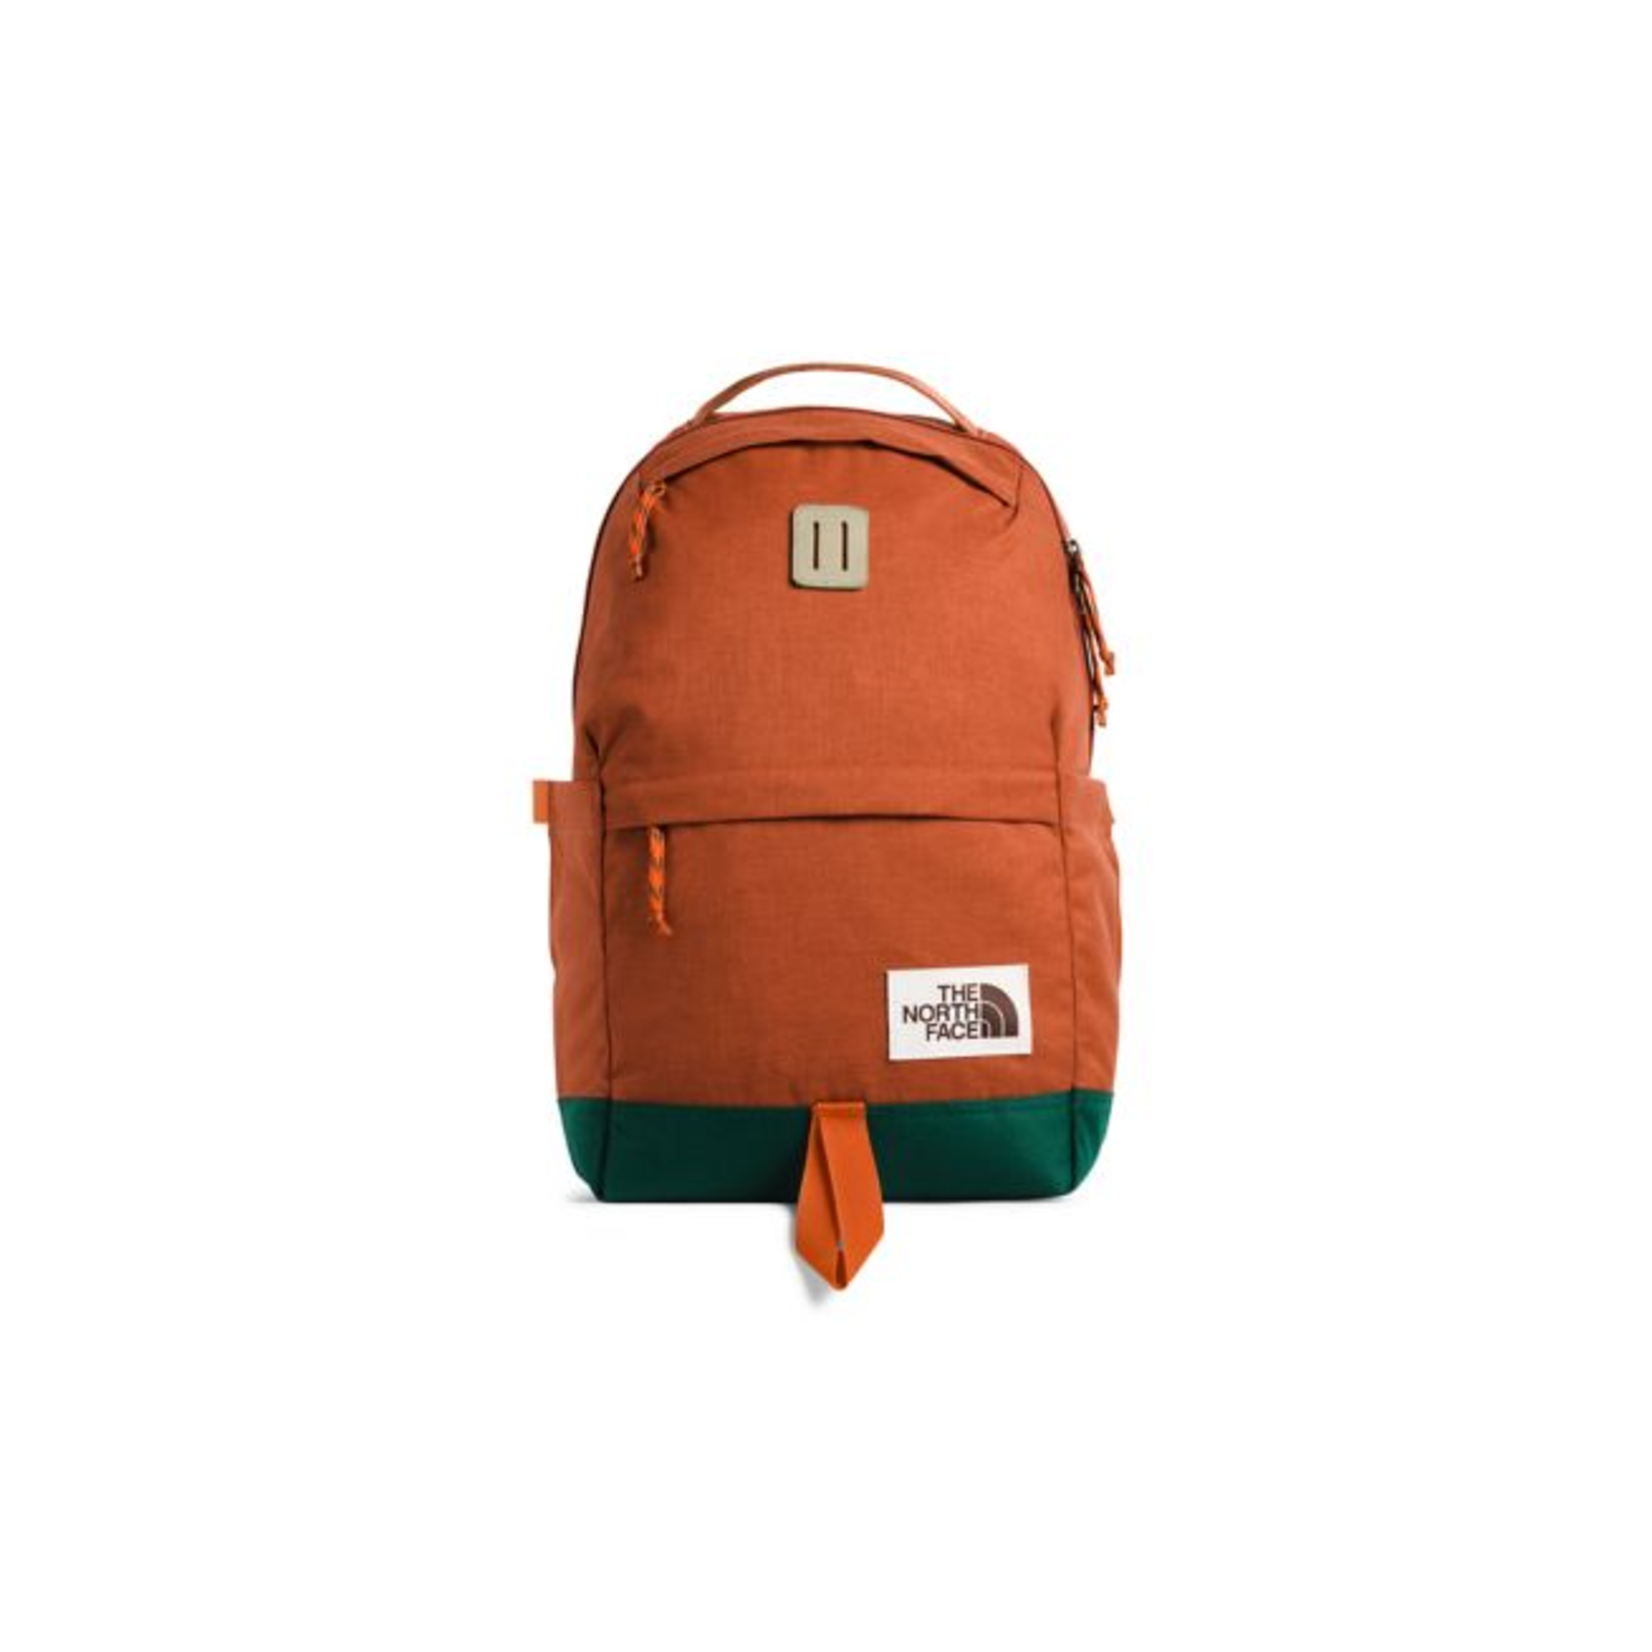 THE NORTH FACE Daypack